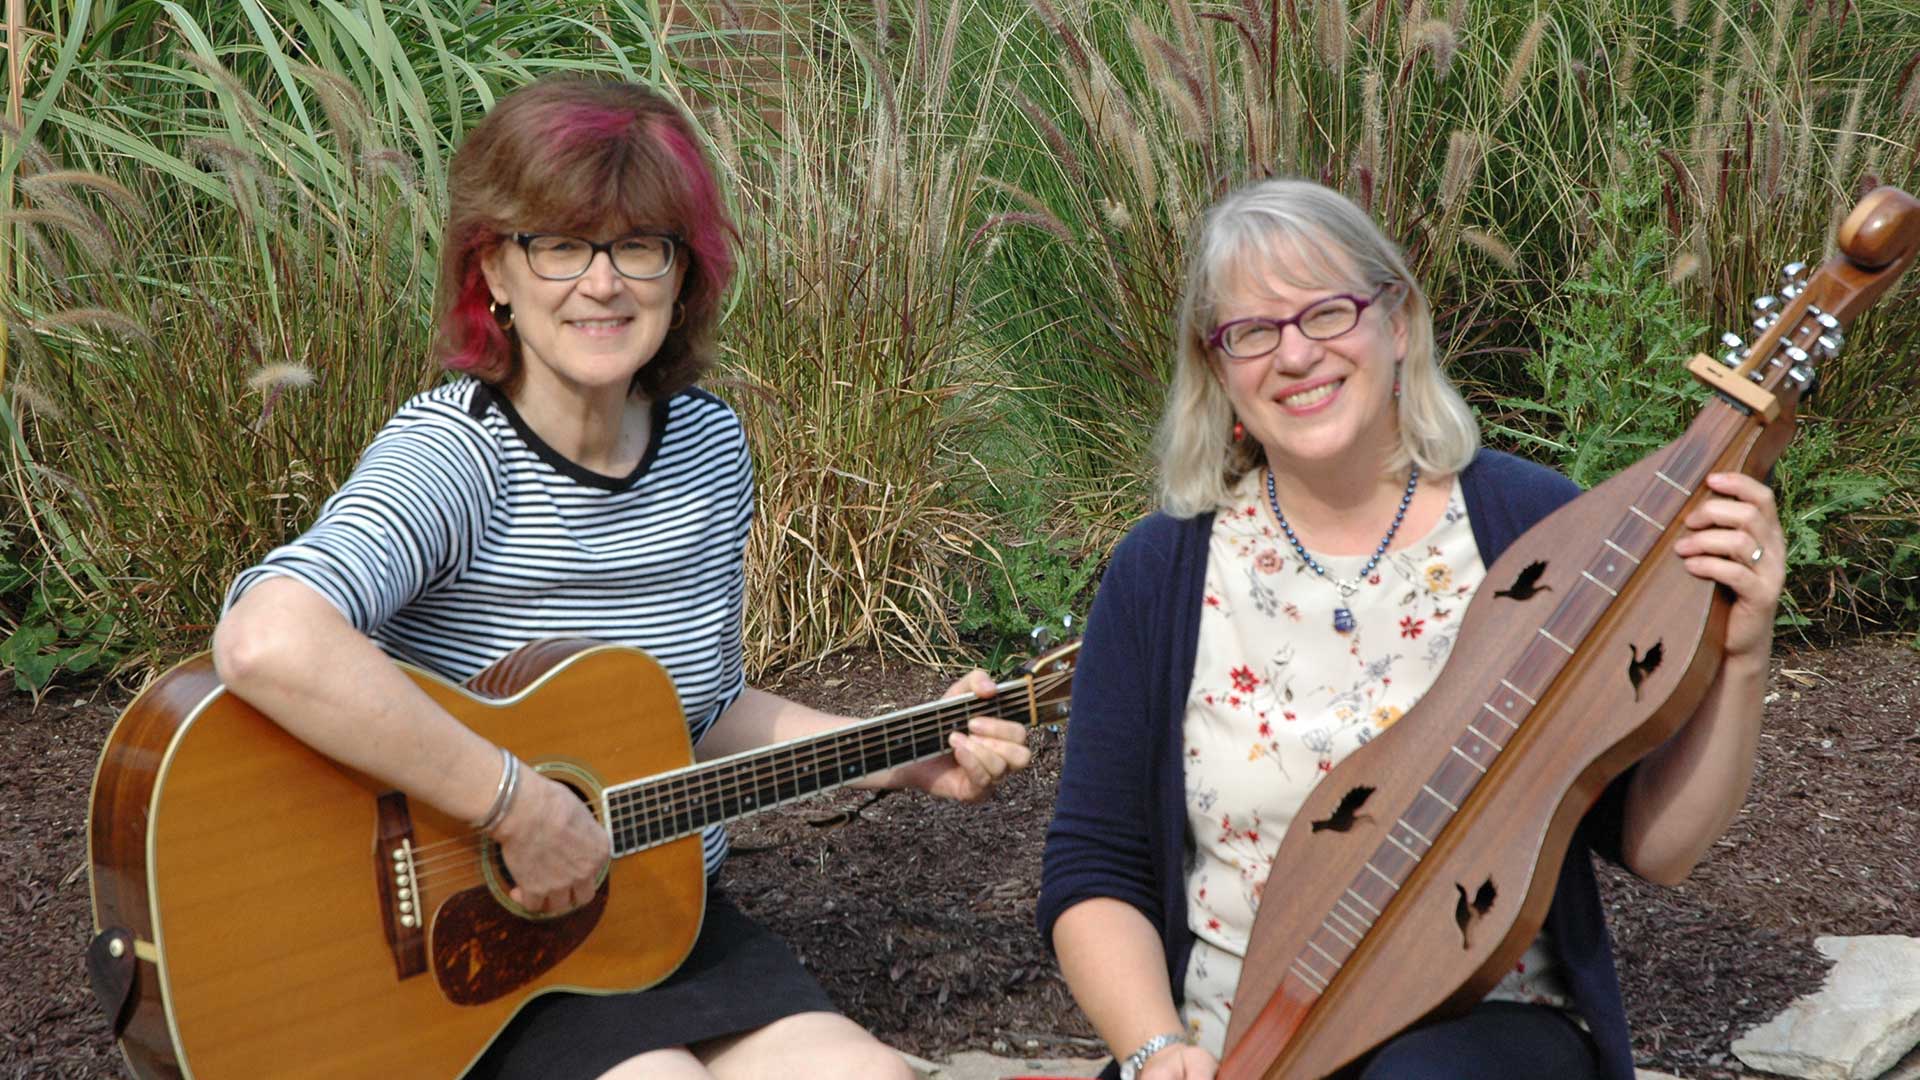 Two women sit in front of prairie grass, holding a guitar and dulcimer